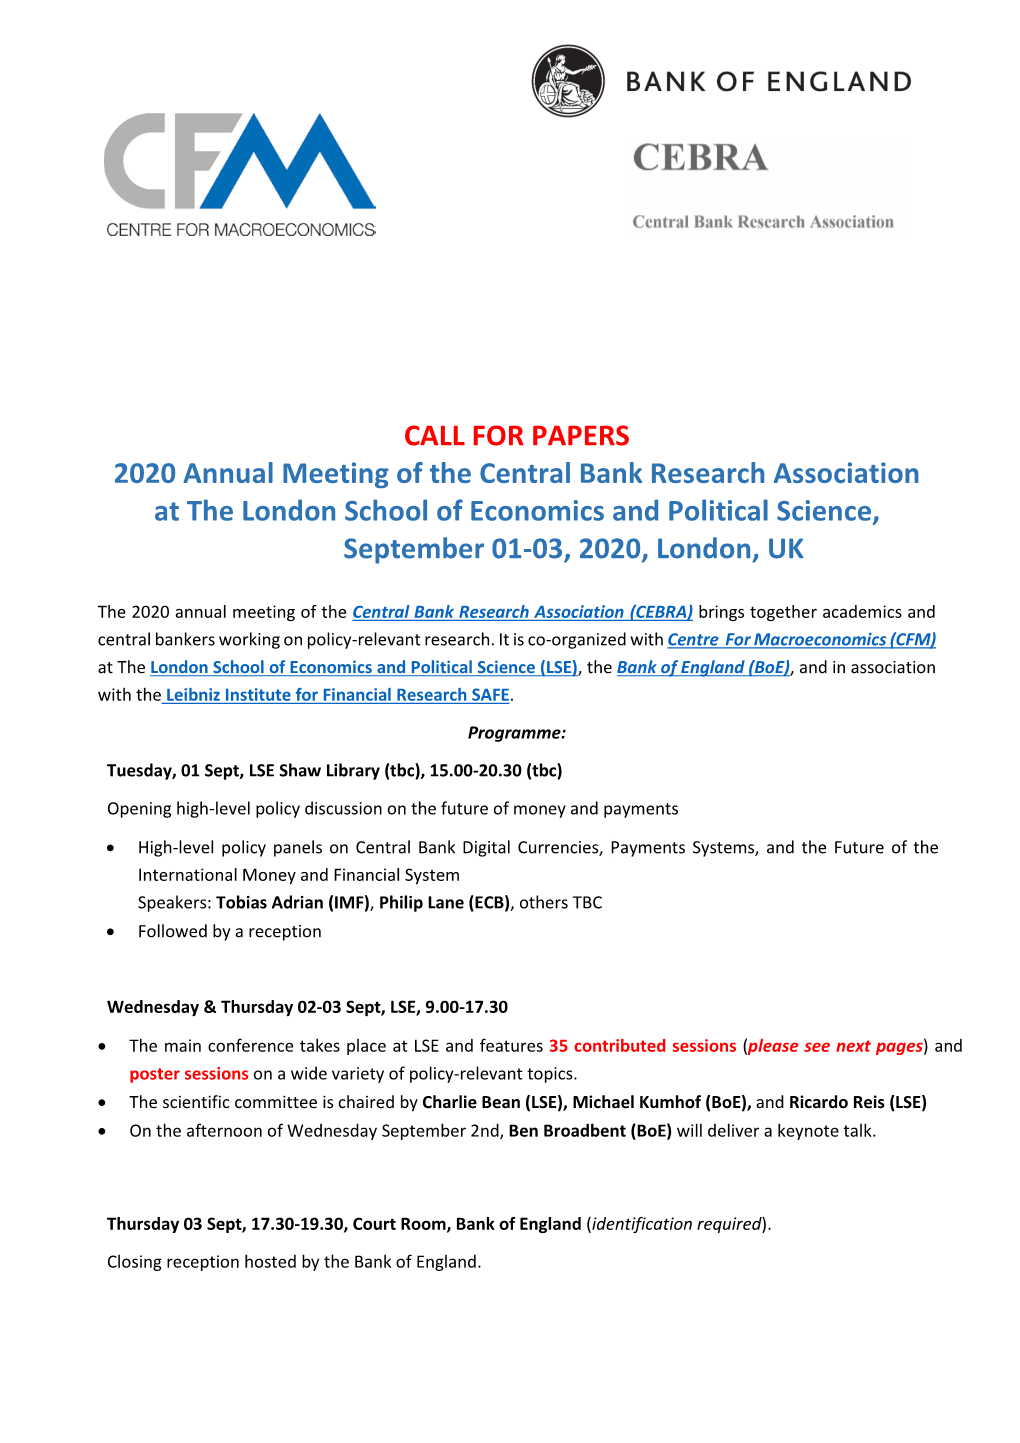 2020 Annual Meeting of the Central Bank Research Association at the London School of Economics and Political Science, September 01-03, 2020, London, UK